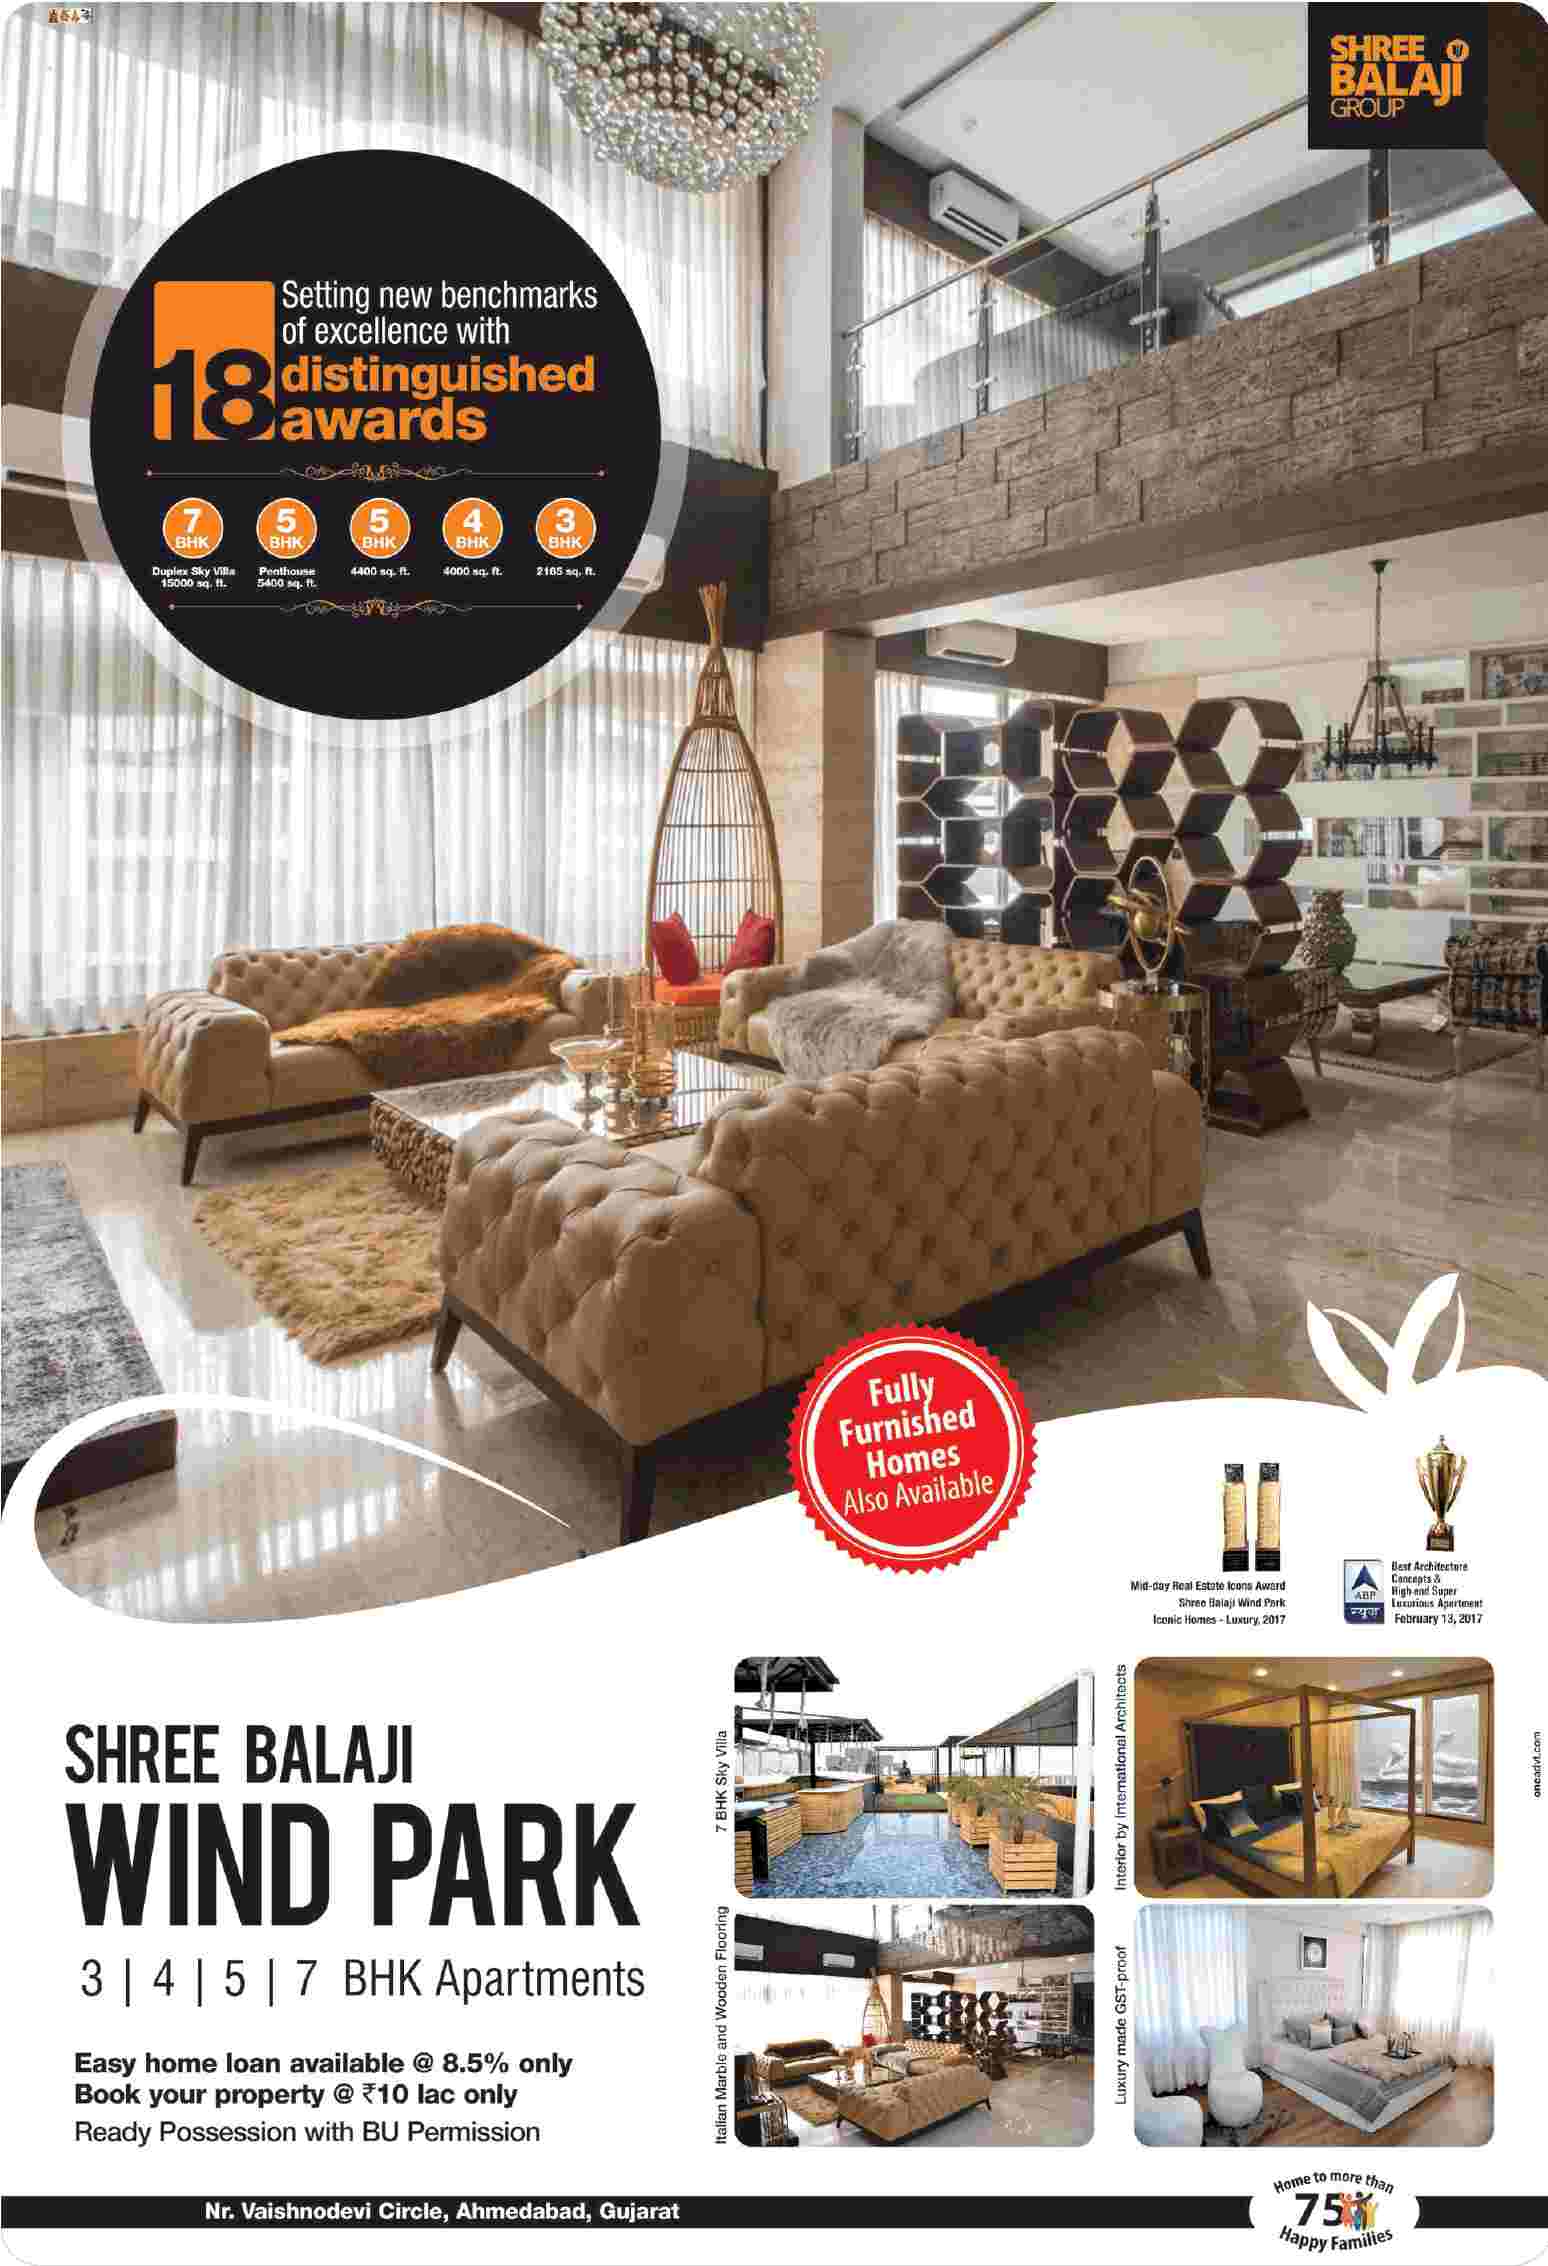 Book your home at Rs. 10 Lac only at Shree Balaji Wind Park in Ahmedabad Update